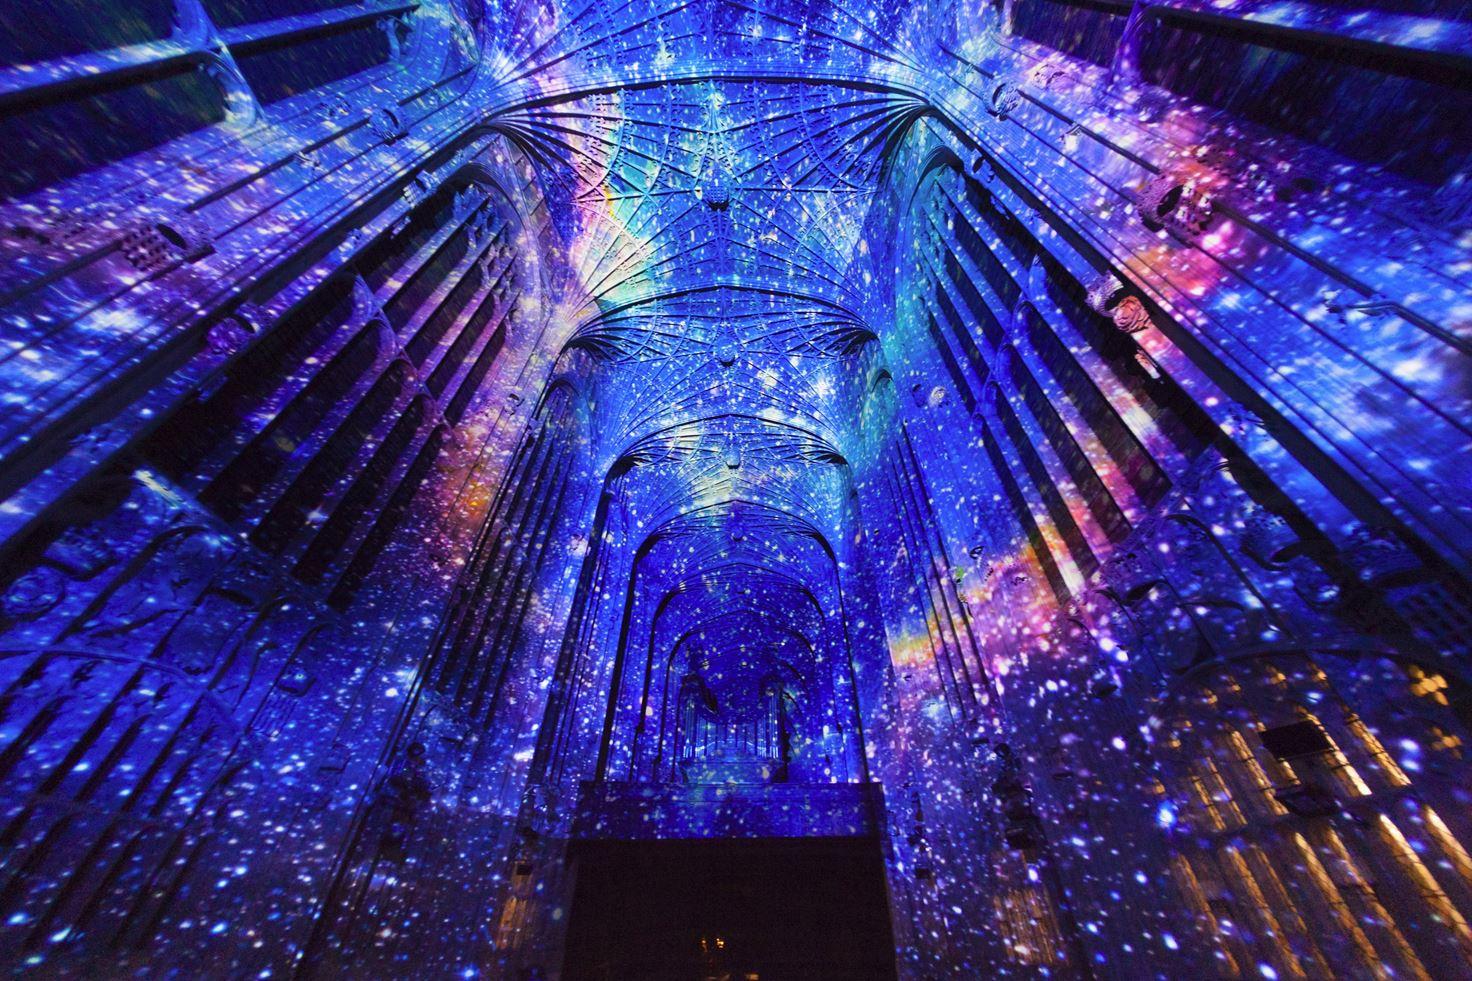 Immersive Projections in King's College Chapel, University of Cambridge (1)